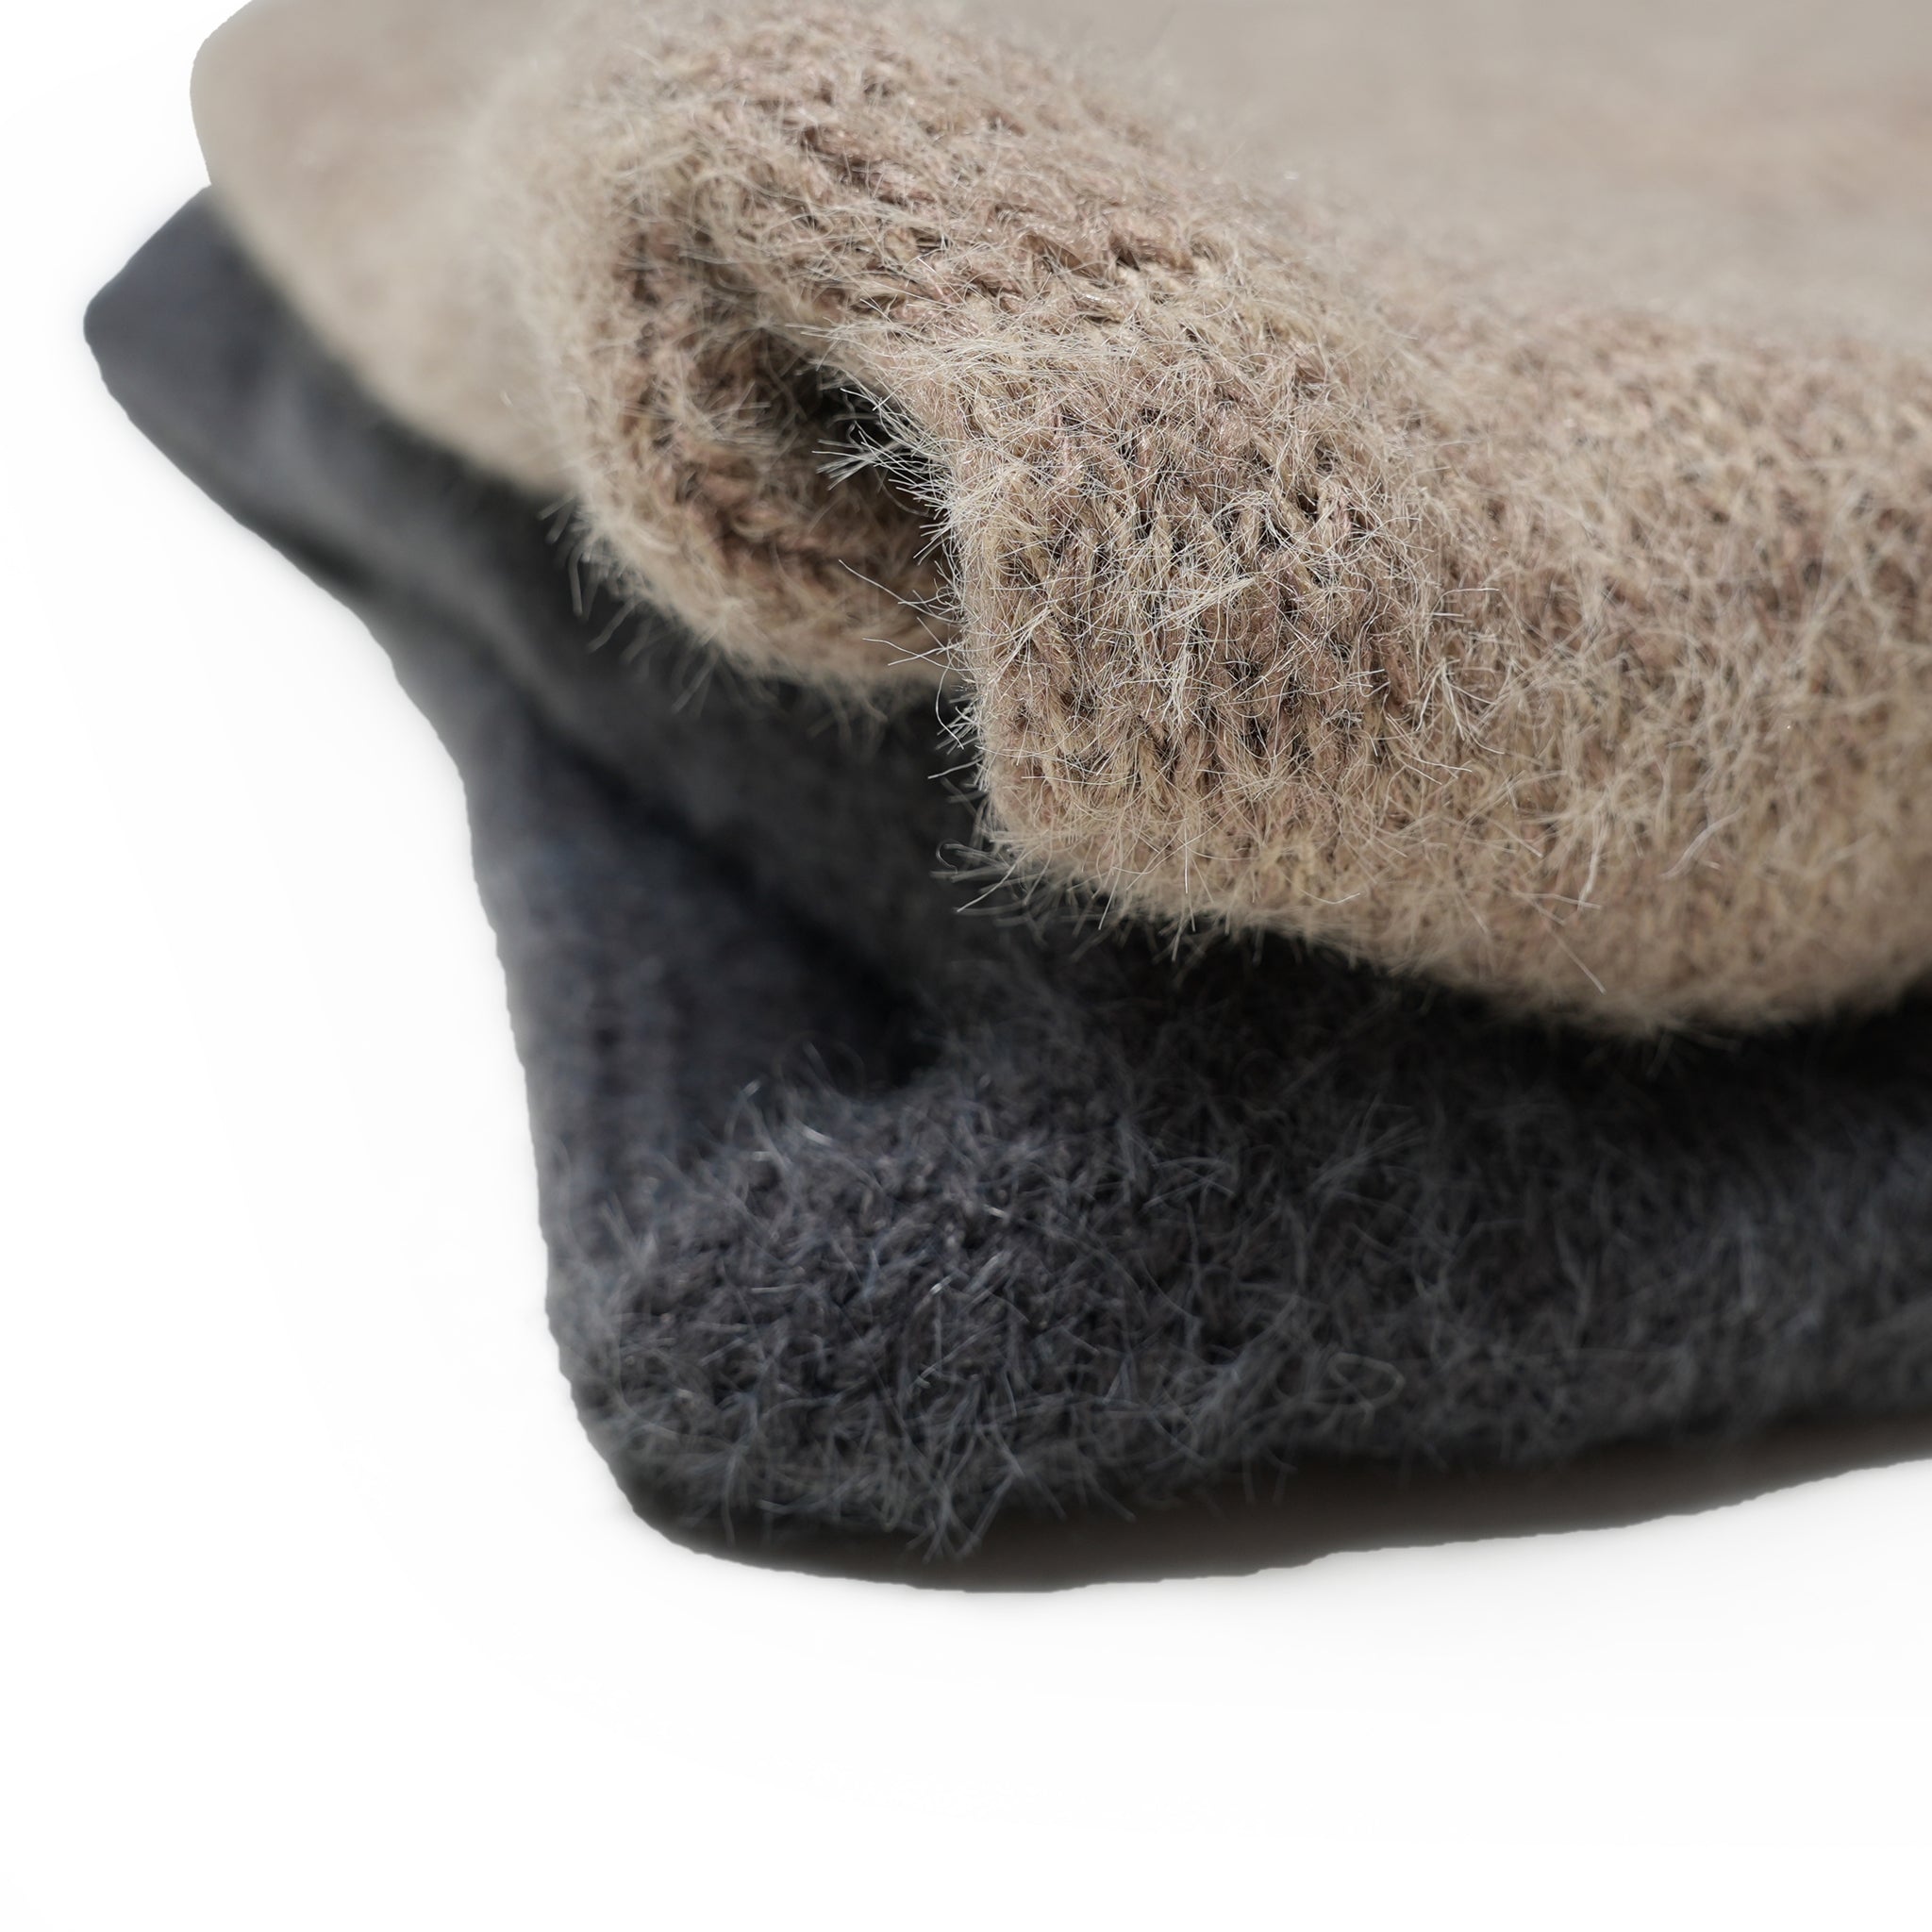 No:m-2303752 | Name:shaggy mohair knit cardigan | Color:Beige/Charcoal【MODEM DESIGN_モデムデザイン】